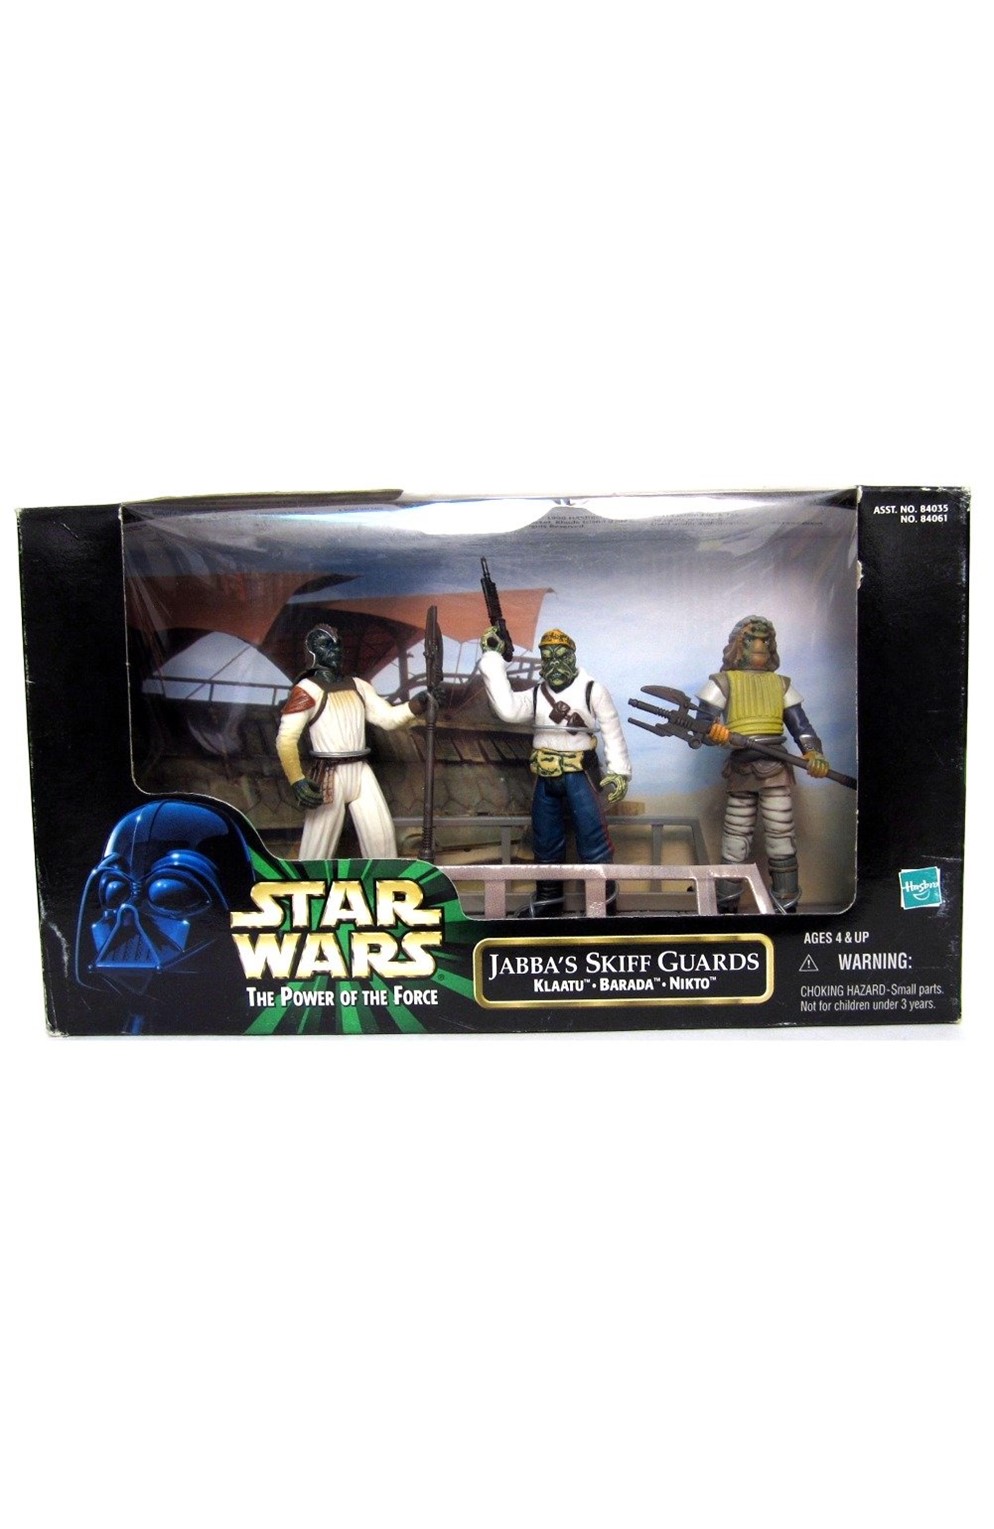 Star Wars Power of the Force - Jabba's Skiff Guards